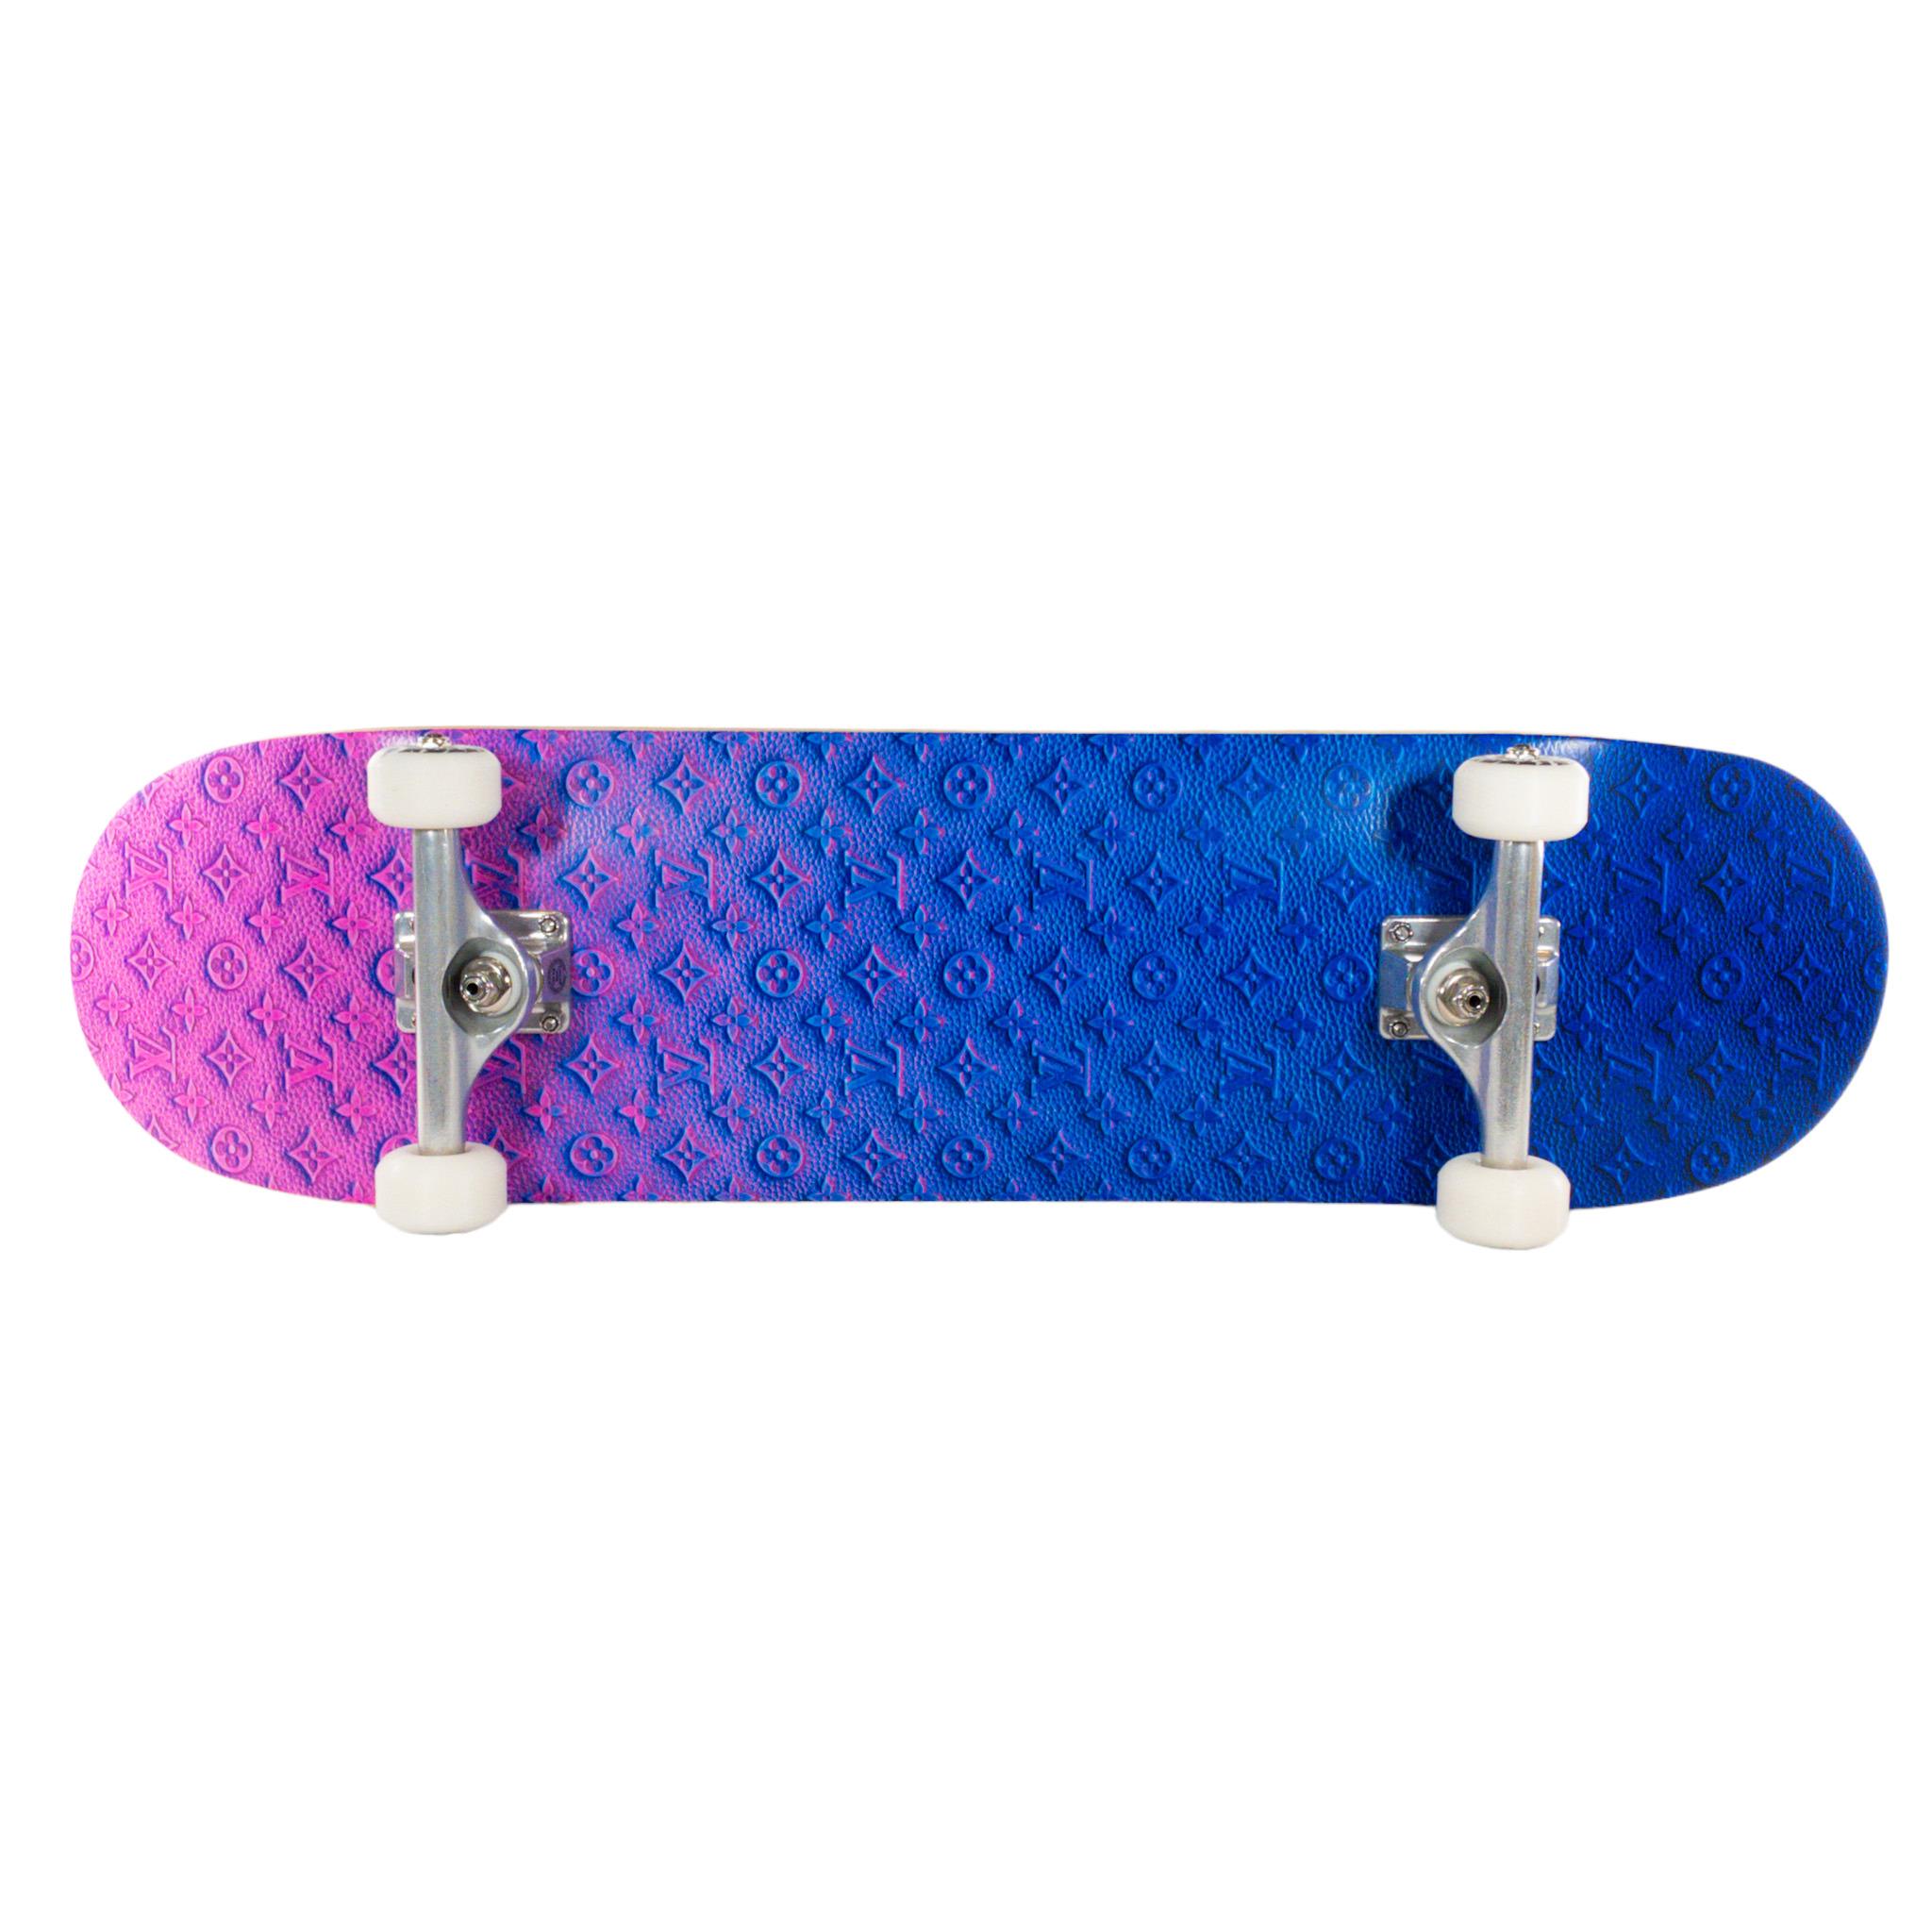 Louis Vuitton x Virgil Abloh Neon Monogram Skateboard, 2022

This is an authentic Louis Vuitton Neon Monogram Skateboard. Limited Edition from 2022 collection, designed by Virgil Abloh. Features black and multicolor textured top with printed